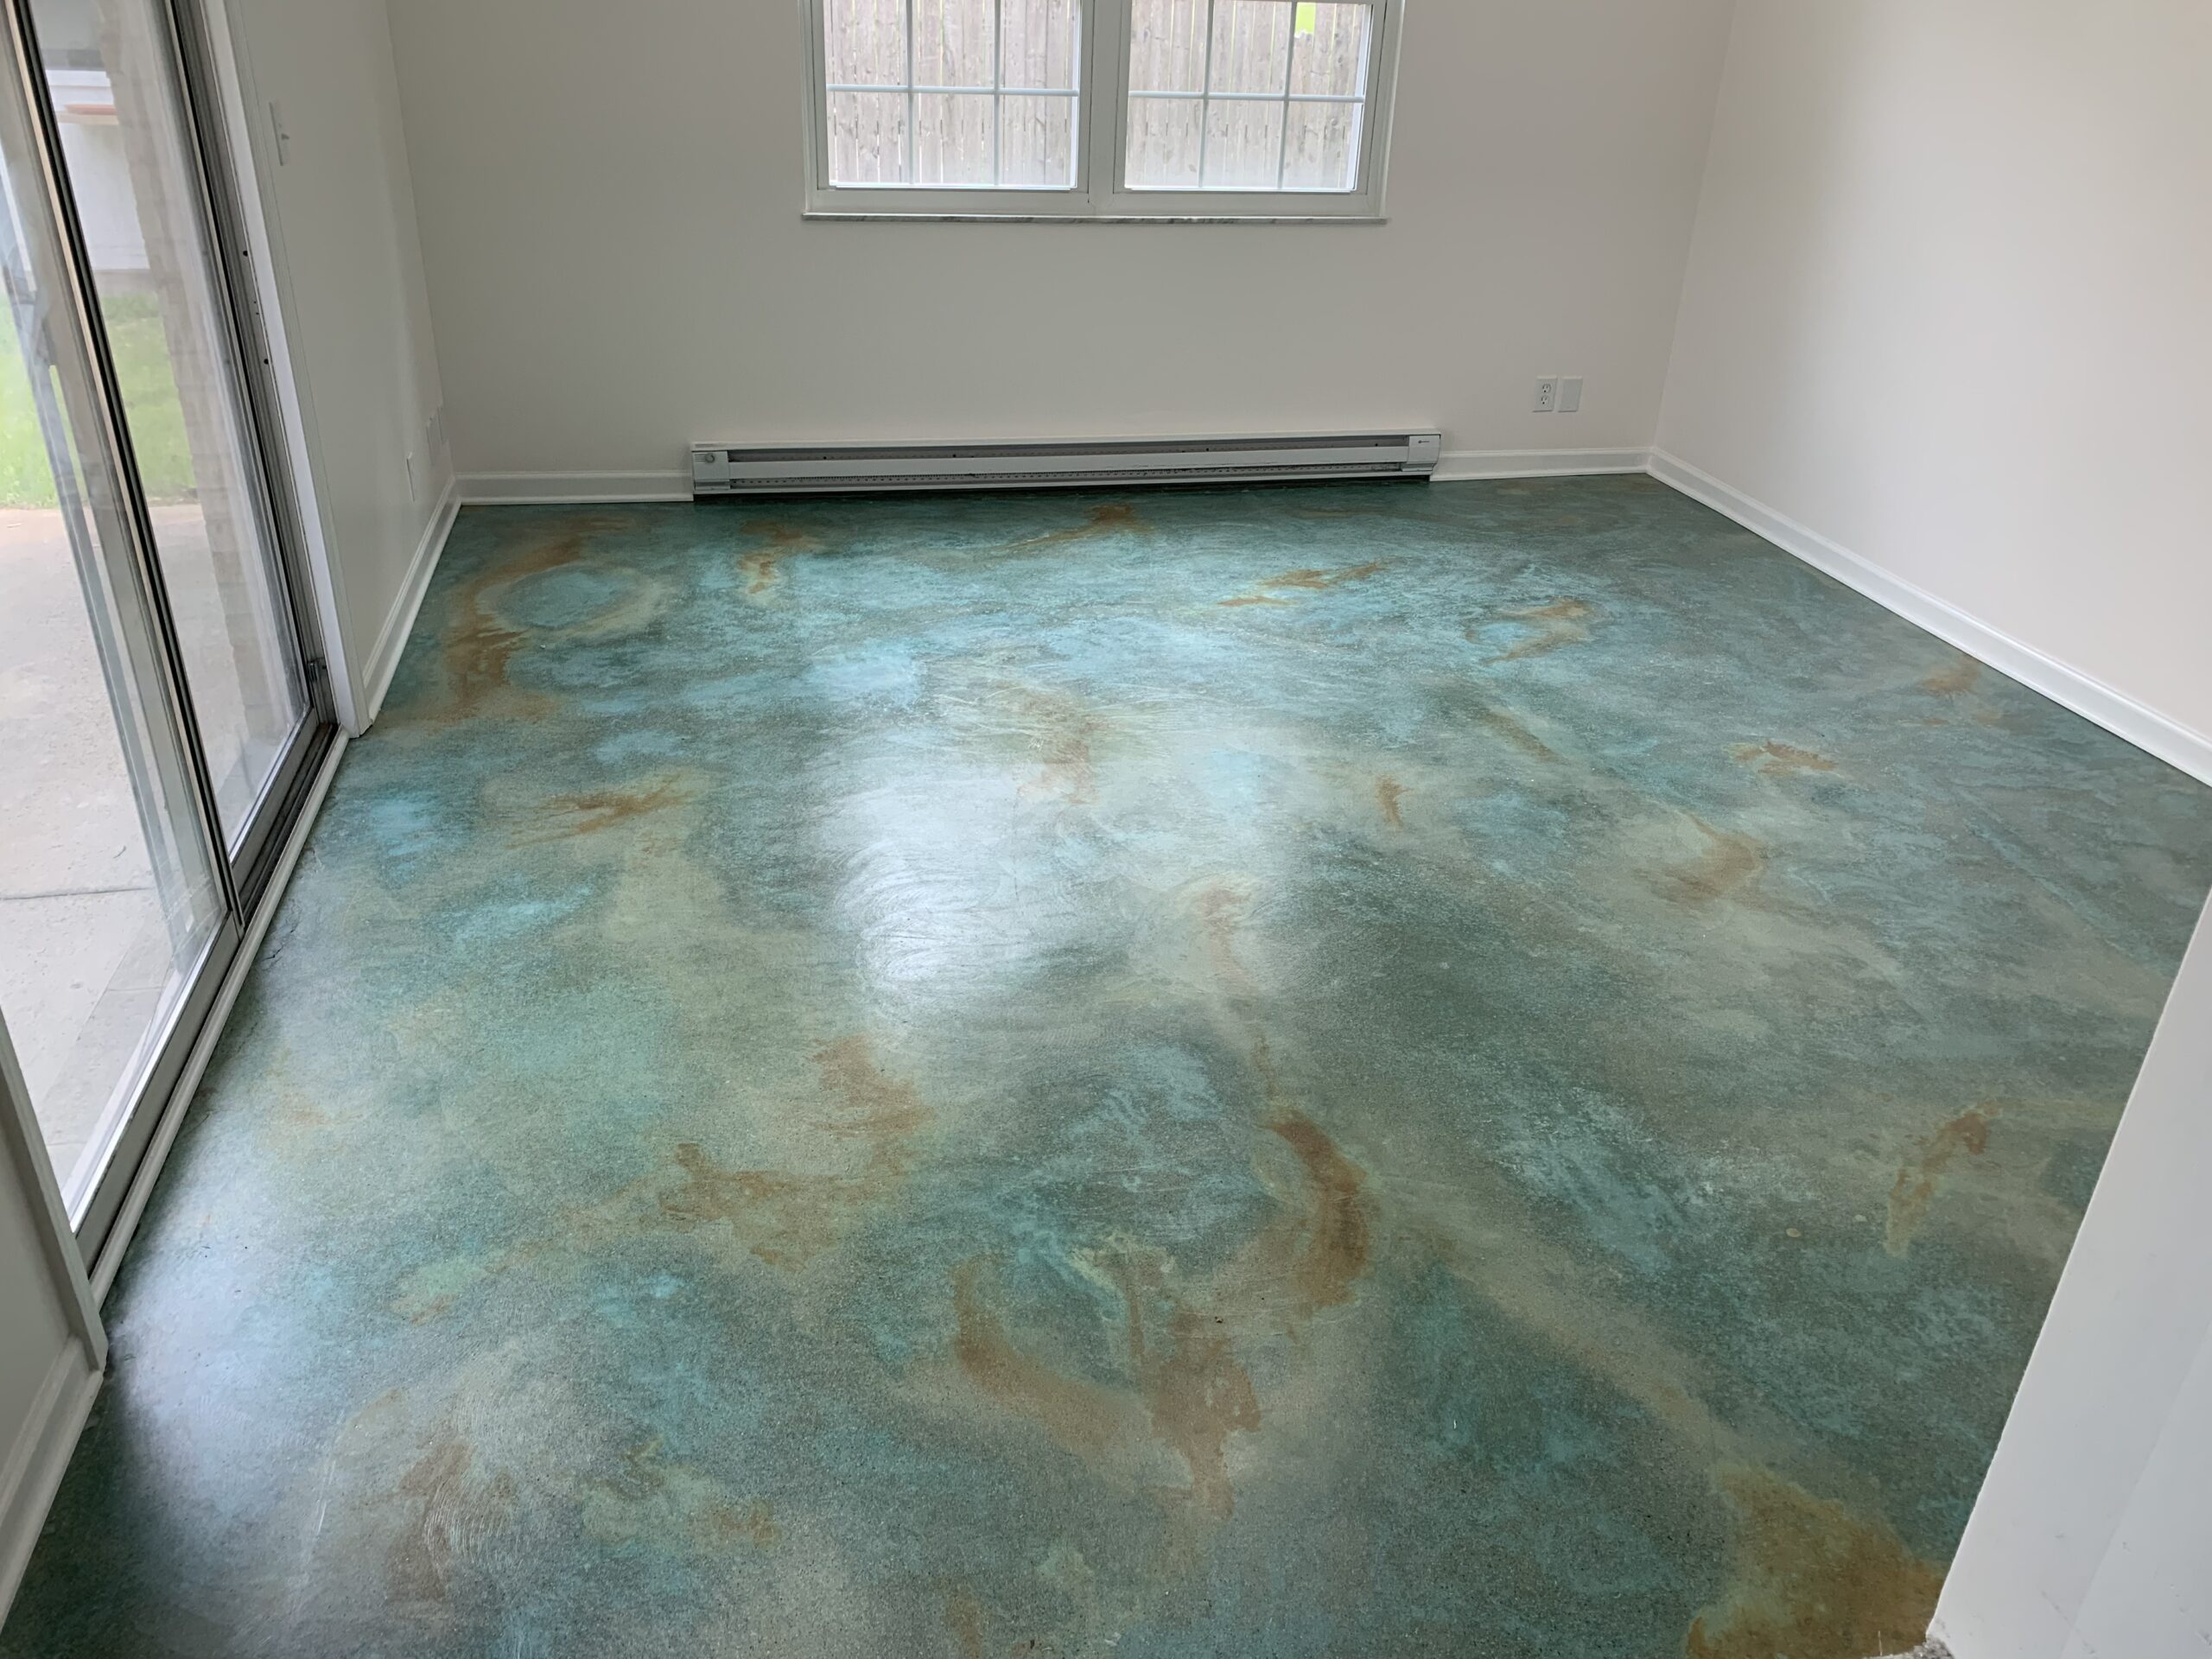 Concrete floor after application of two coats of AcquaSeal Gloss, showcasing a polished finish